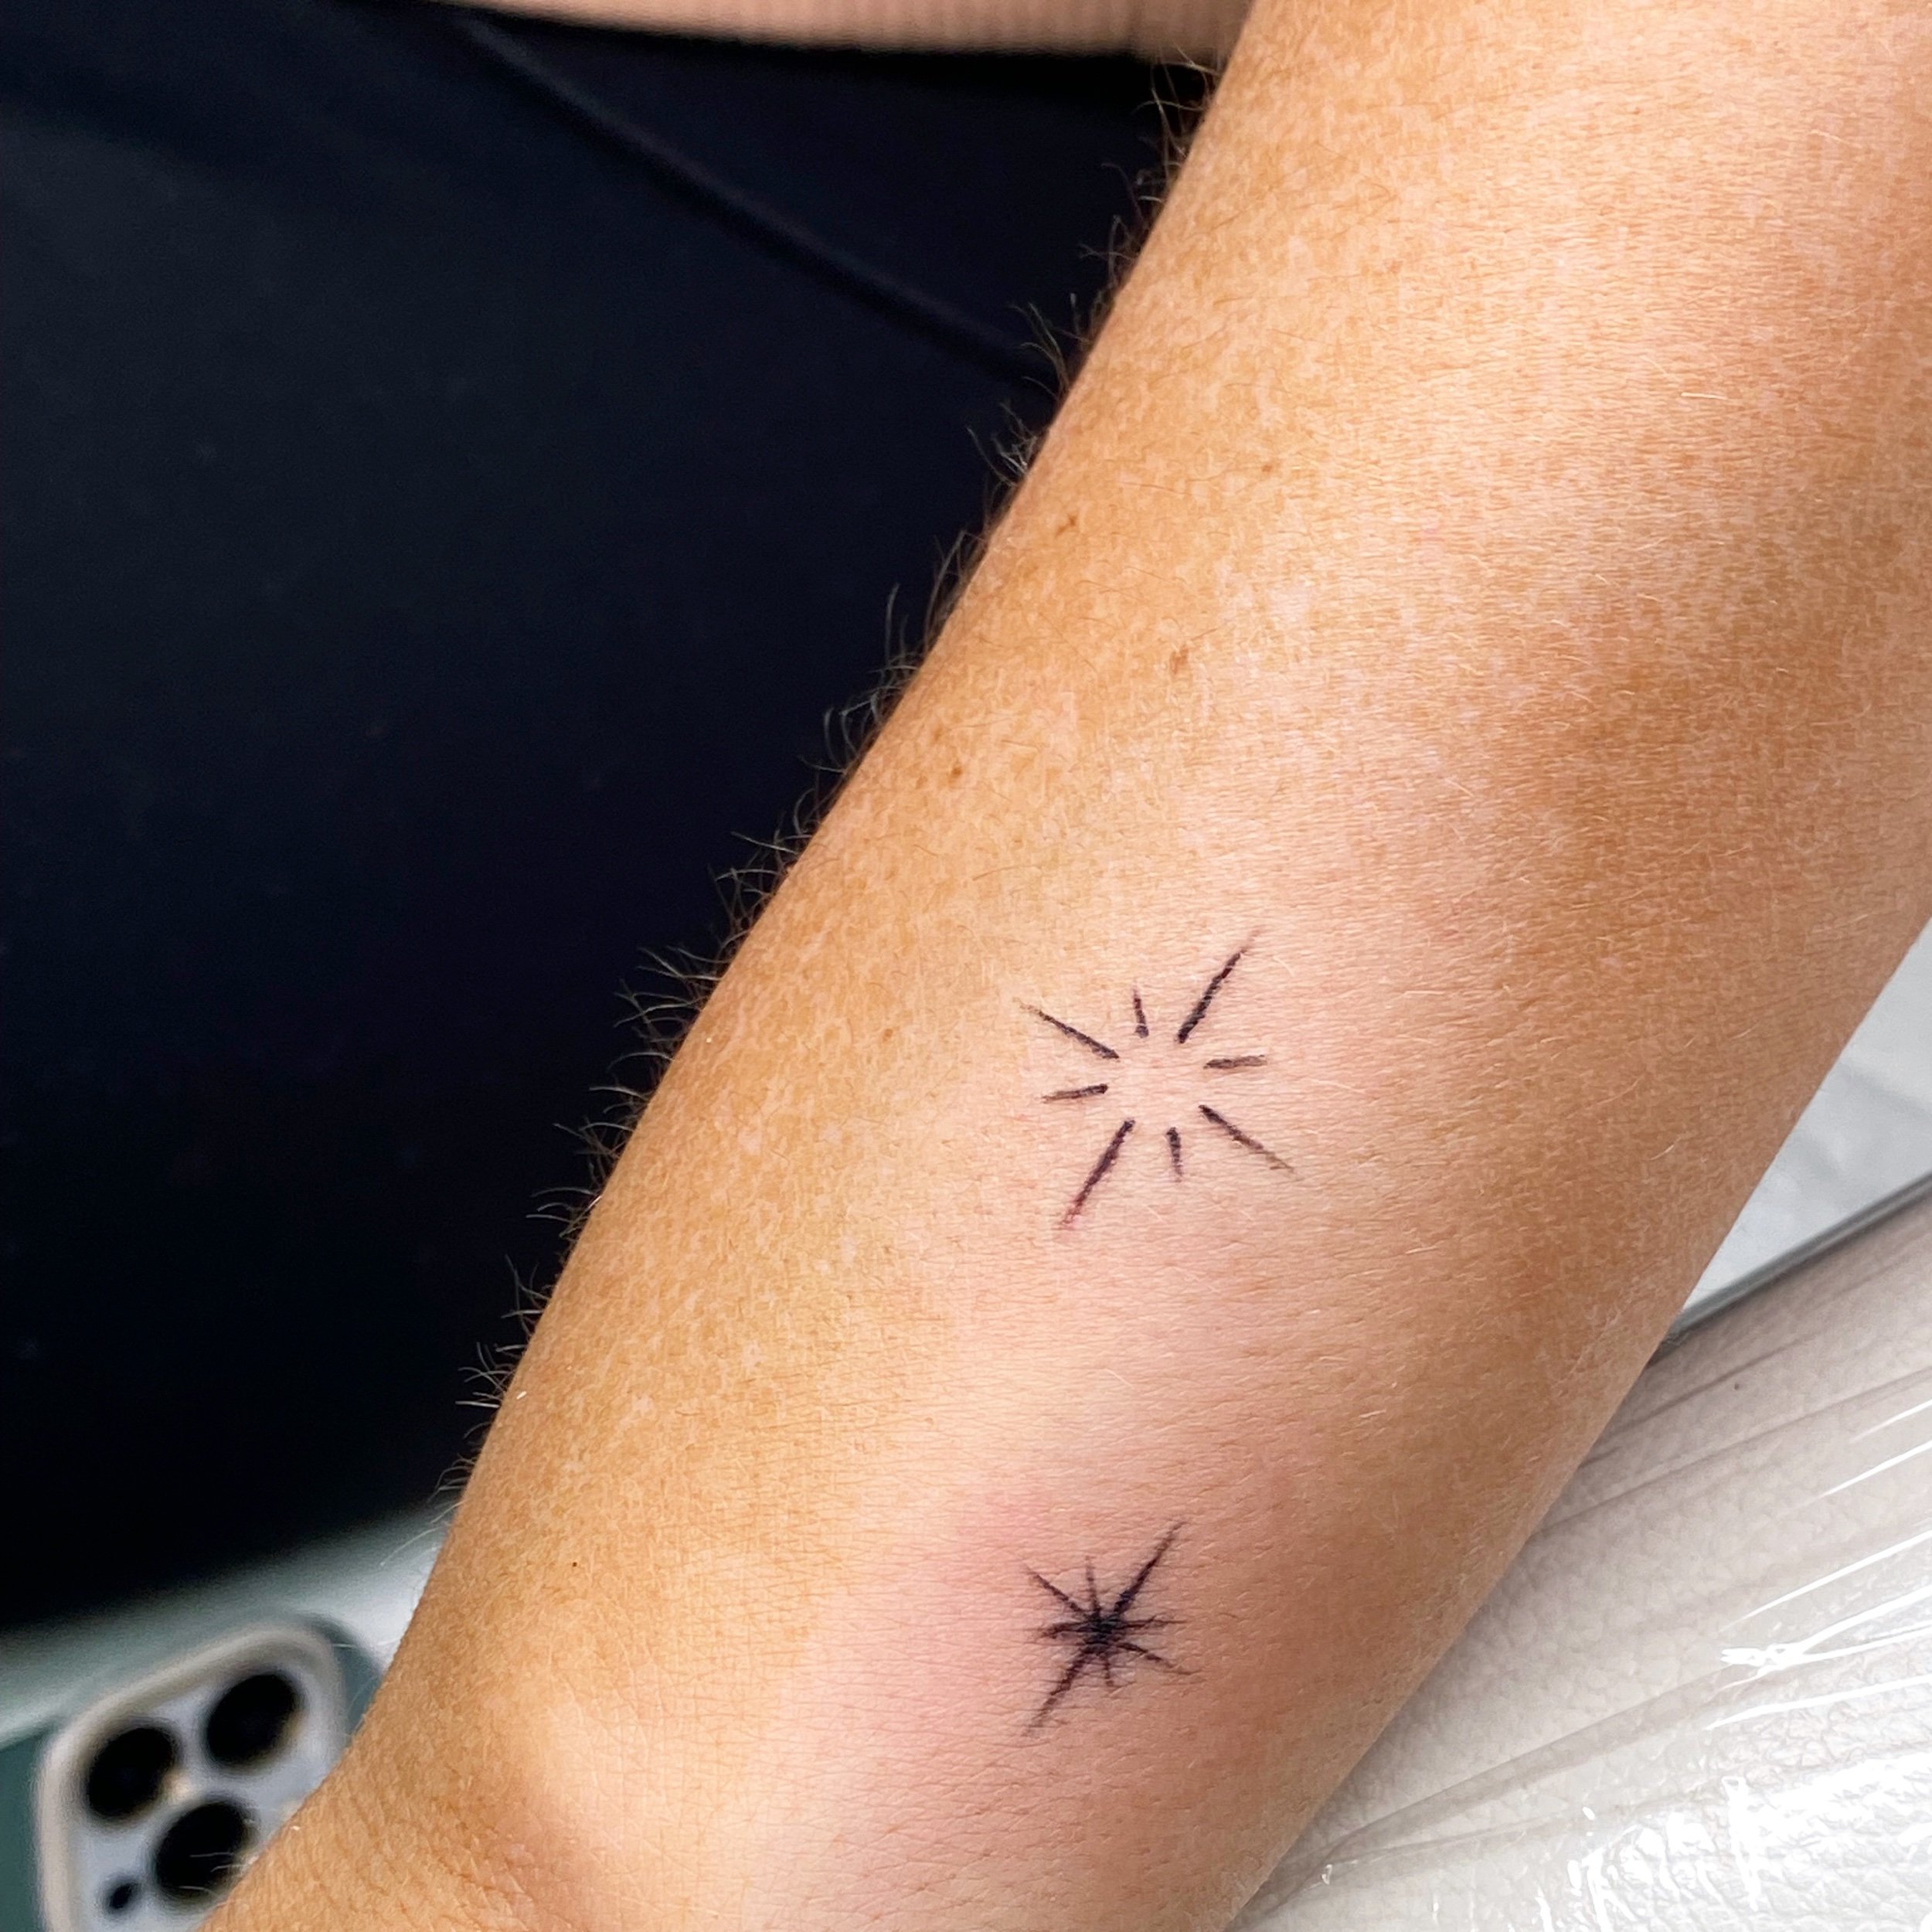 What are some good small tattoo ideas? - Quora